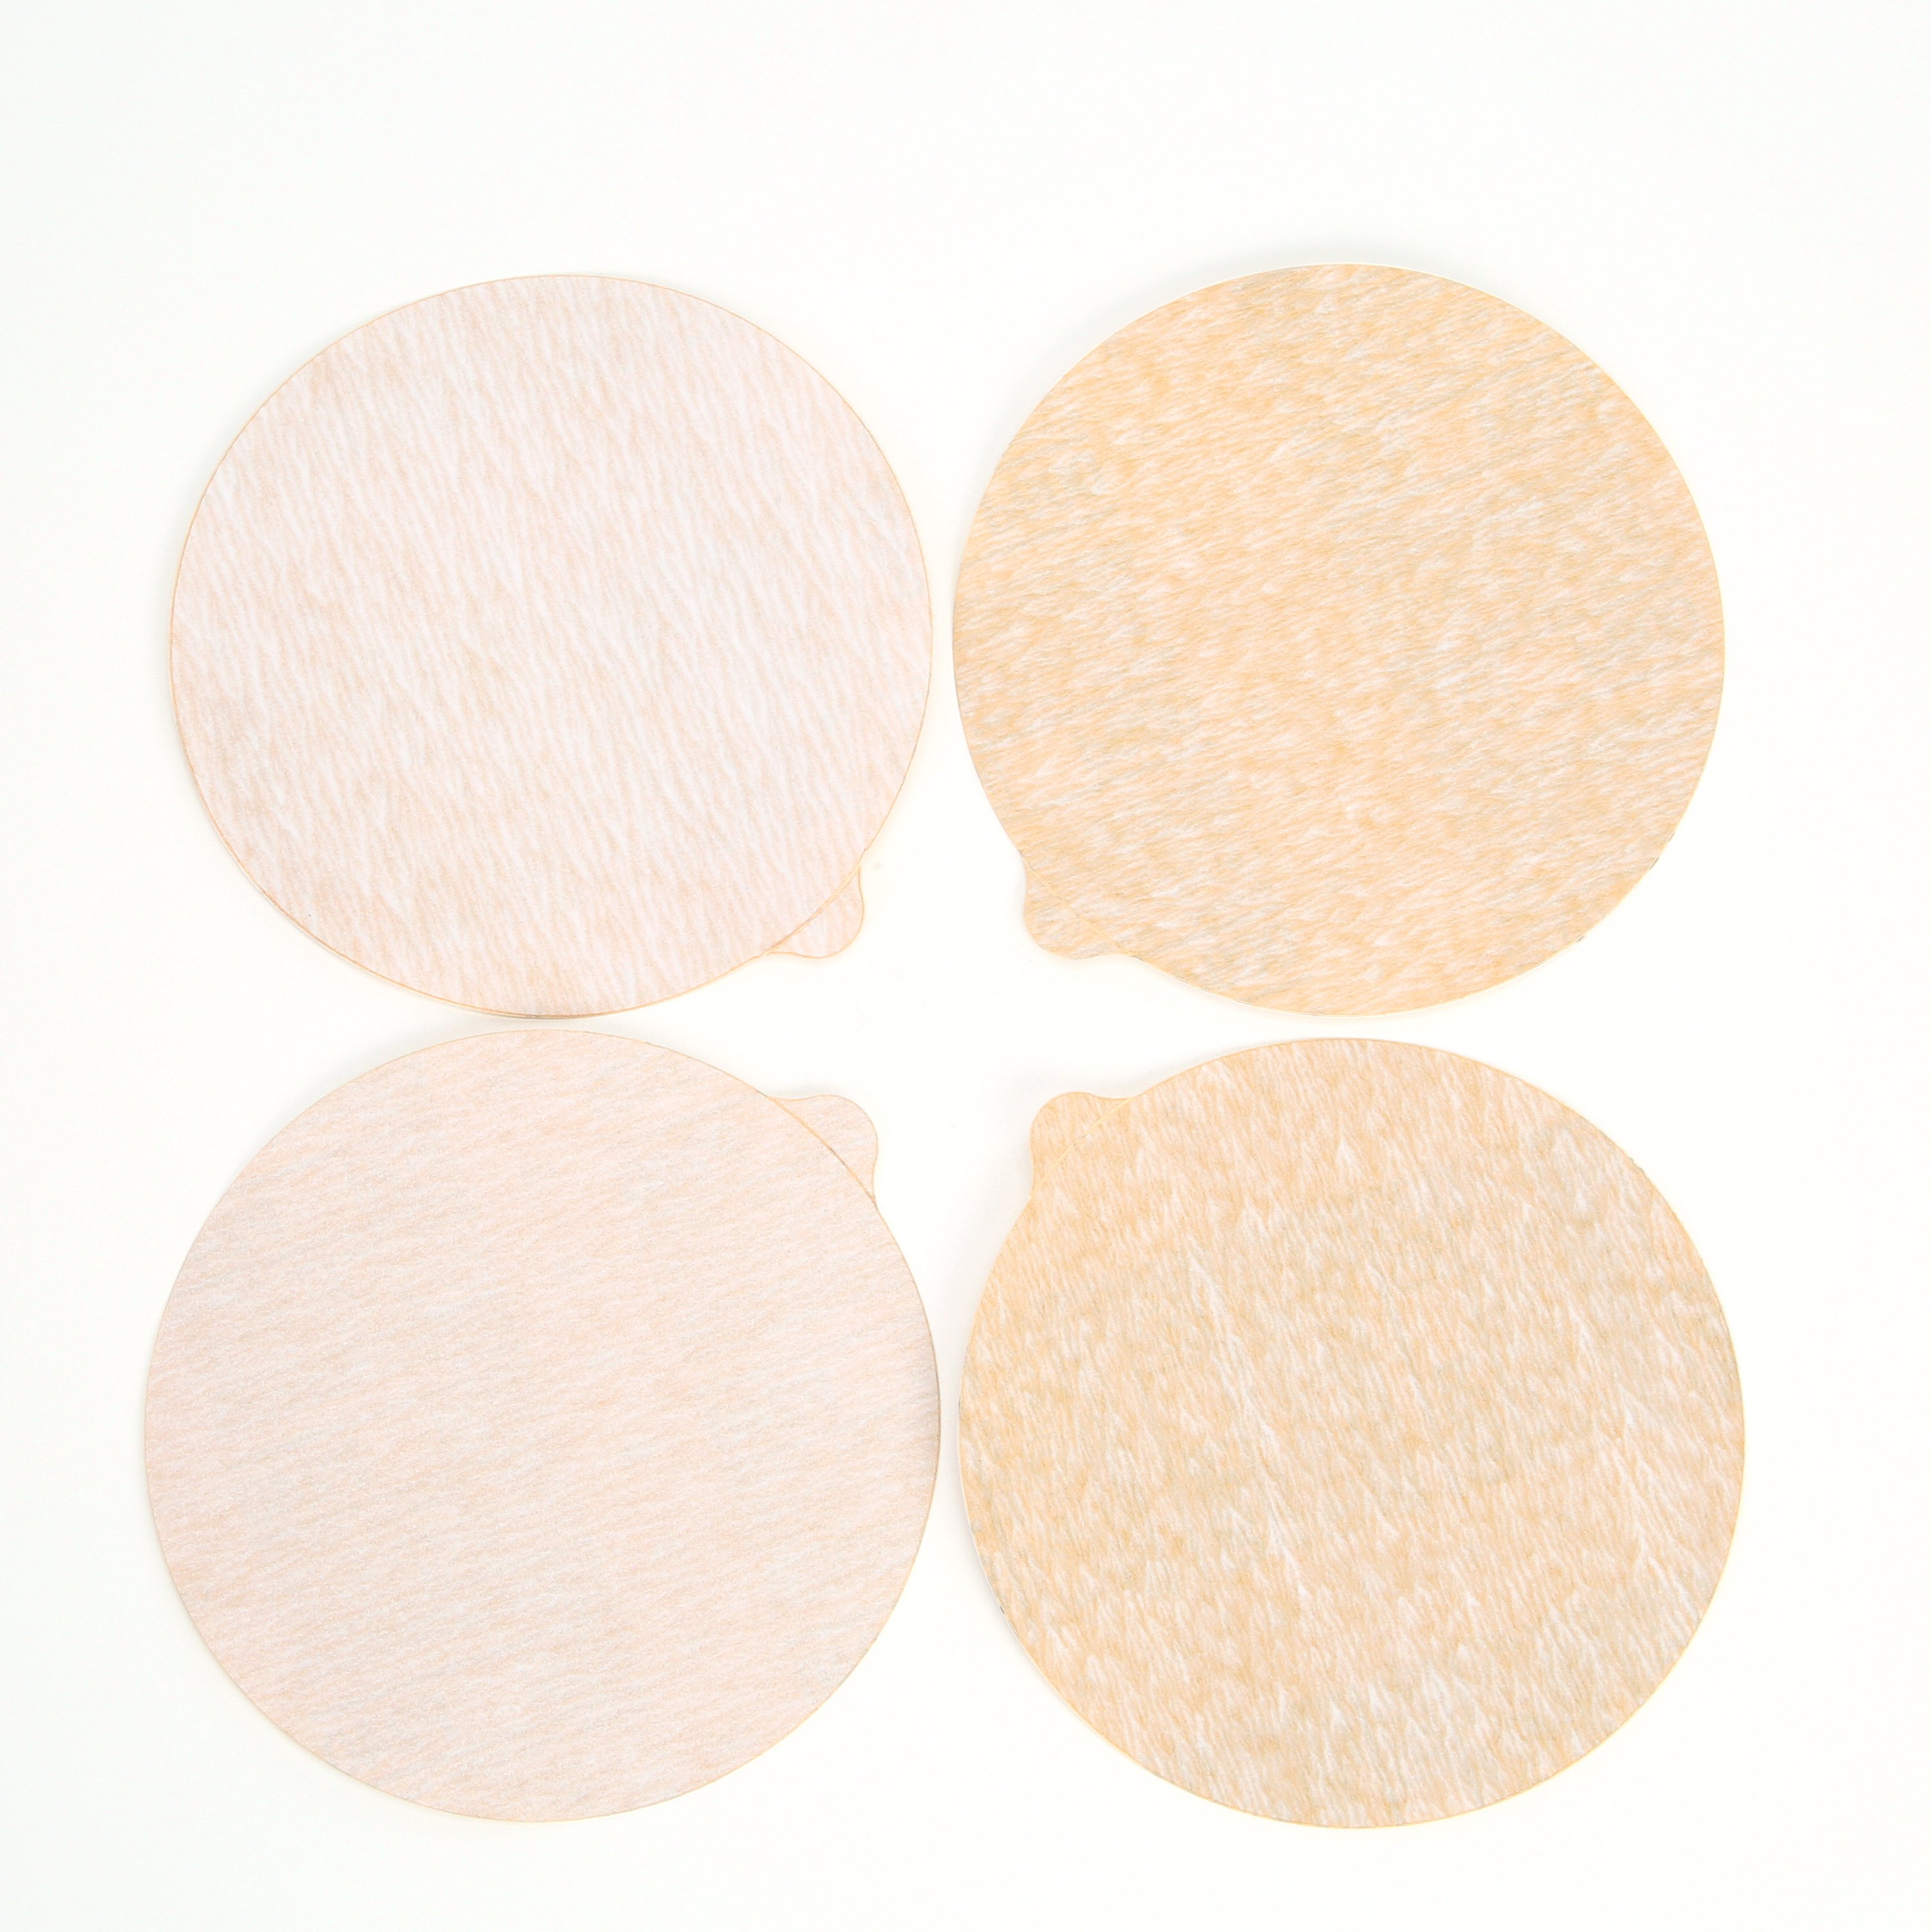 3M™ NX PSA Paper Discs feature an open coat that allows the disc to continue cutting even when sanding softwoods, paints, and other materials that would, otherwise, clog the surface of the disc and hinder sanding ability.